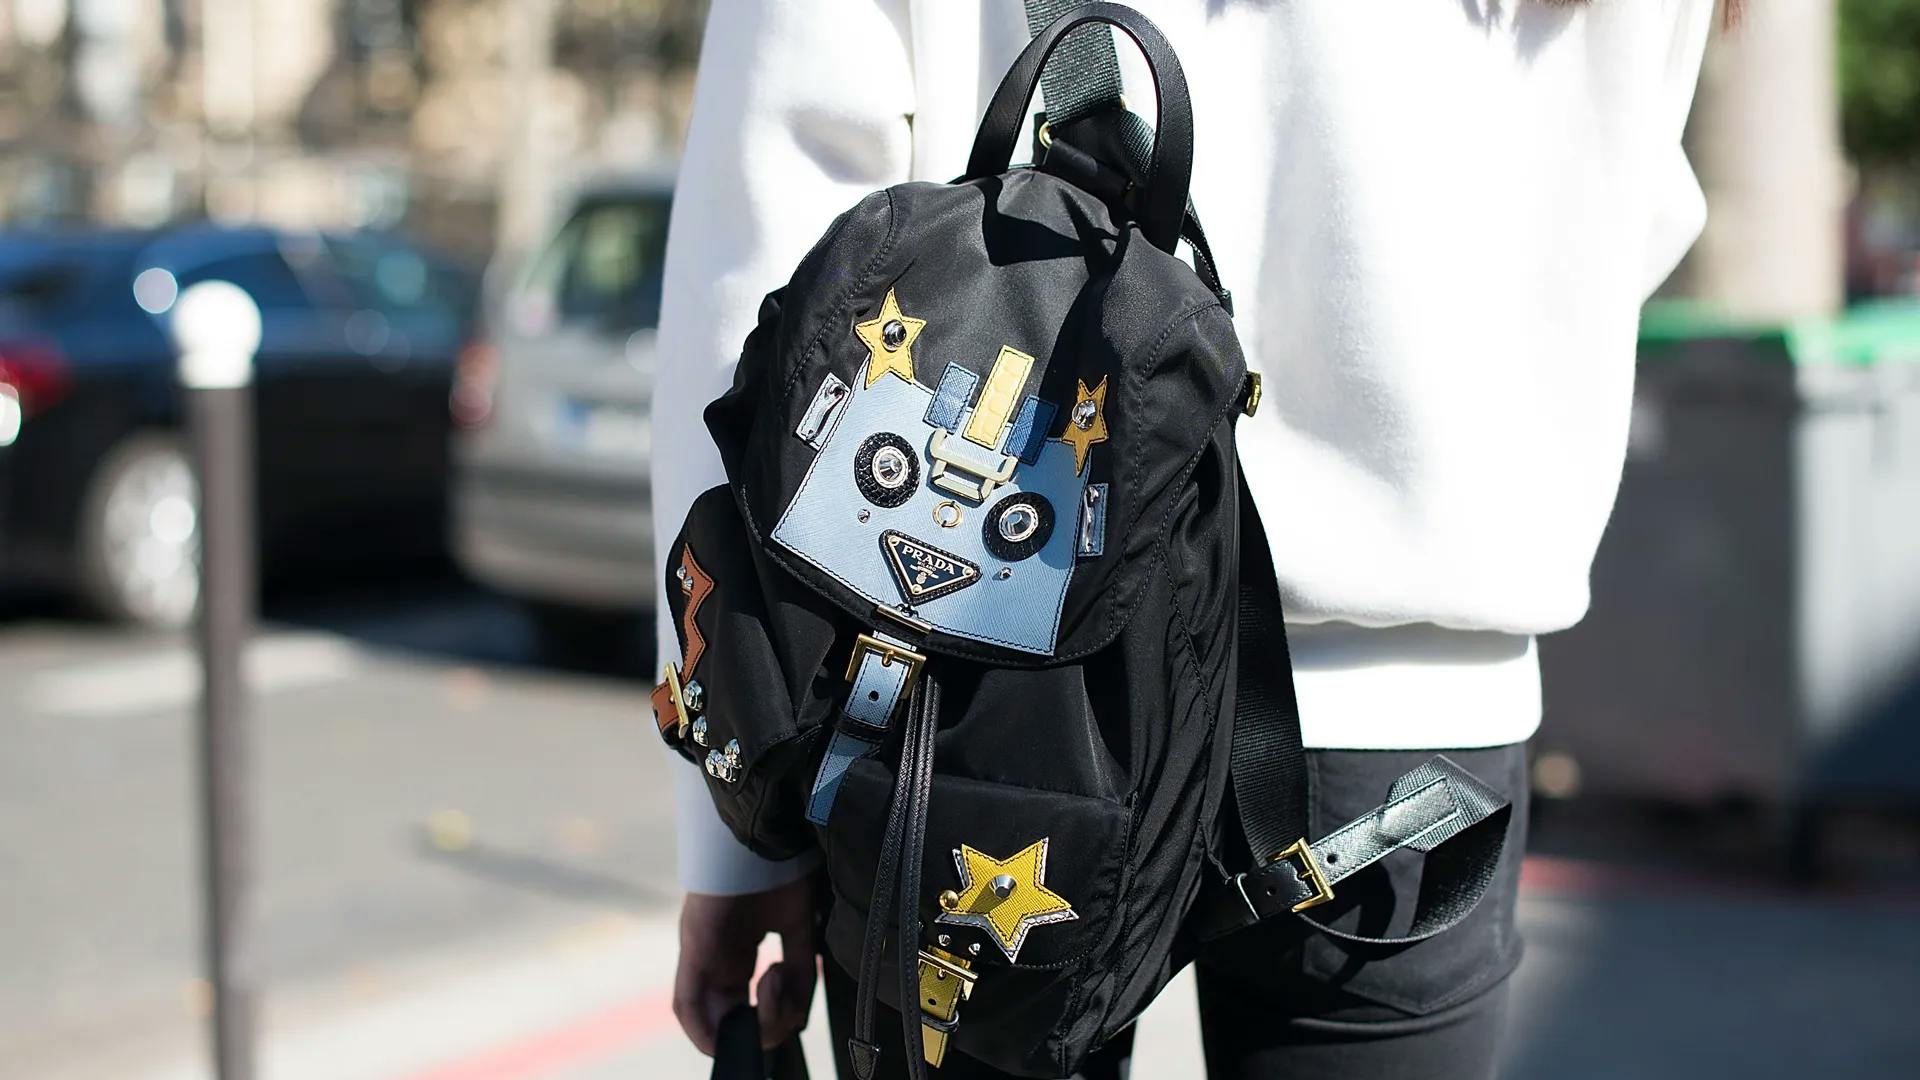 8 Chic Designer Backpacks to Go Back to School in Style